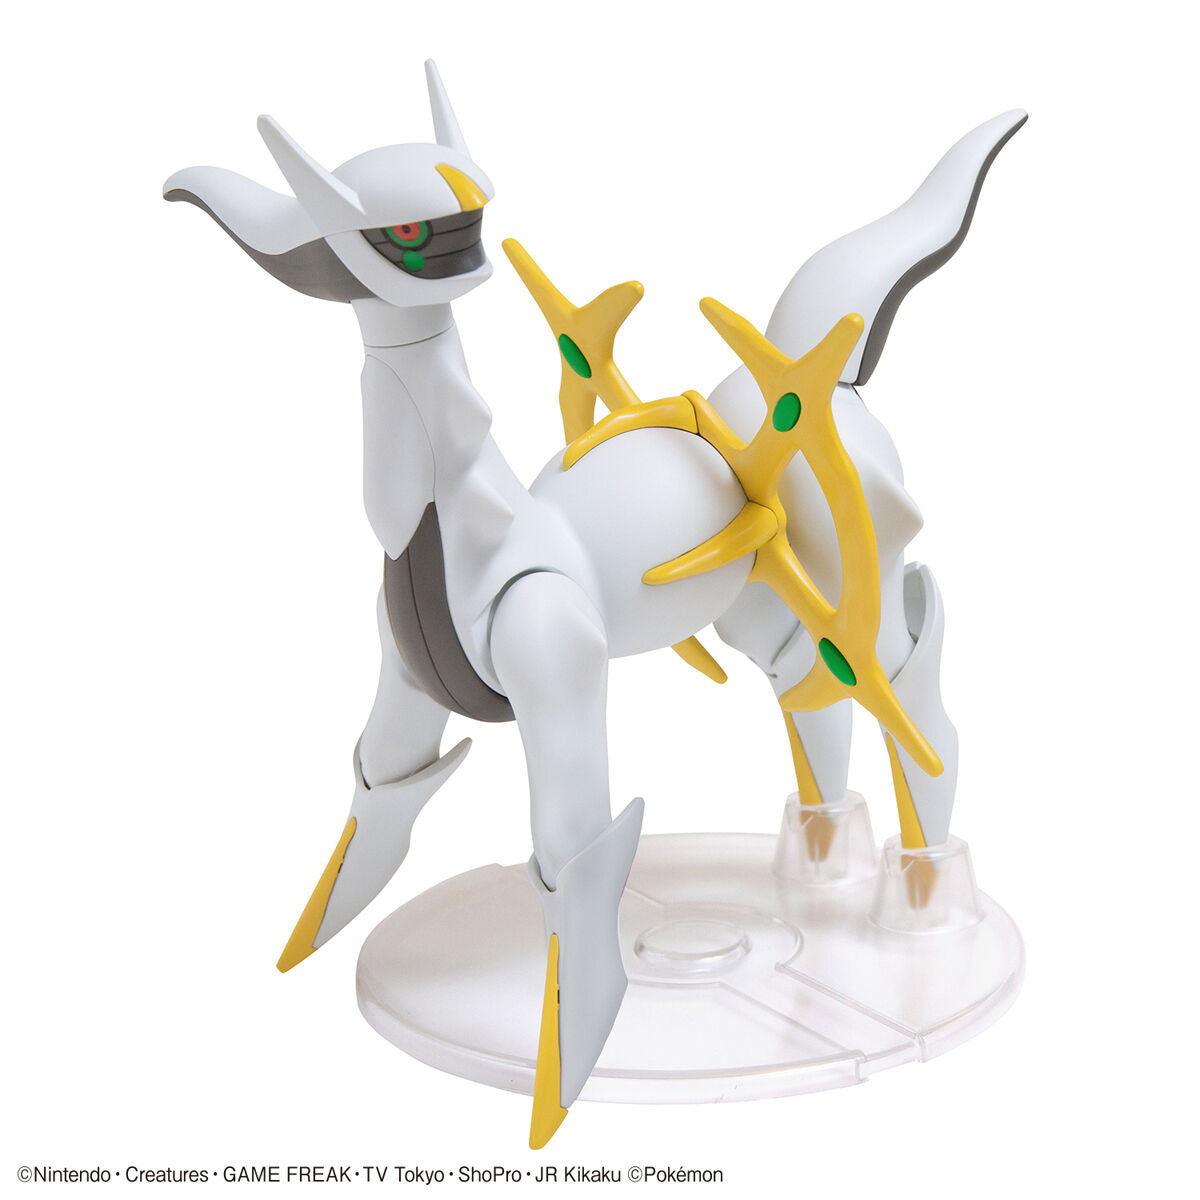 Pokémon - Arceus - Pokémon Model Kit Collection No.51 (Bandai), Includes movable parts for dynamic posing, released on 2022-04-09, Nippon Figures